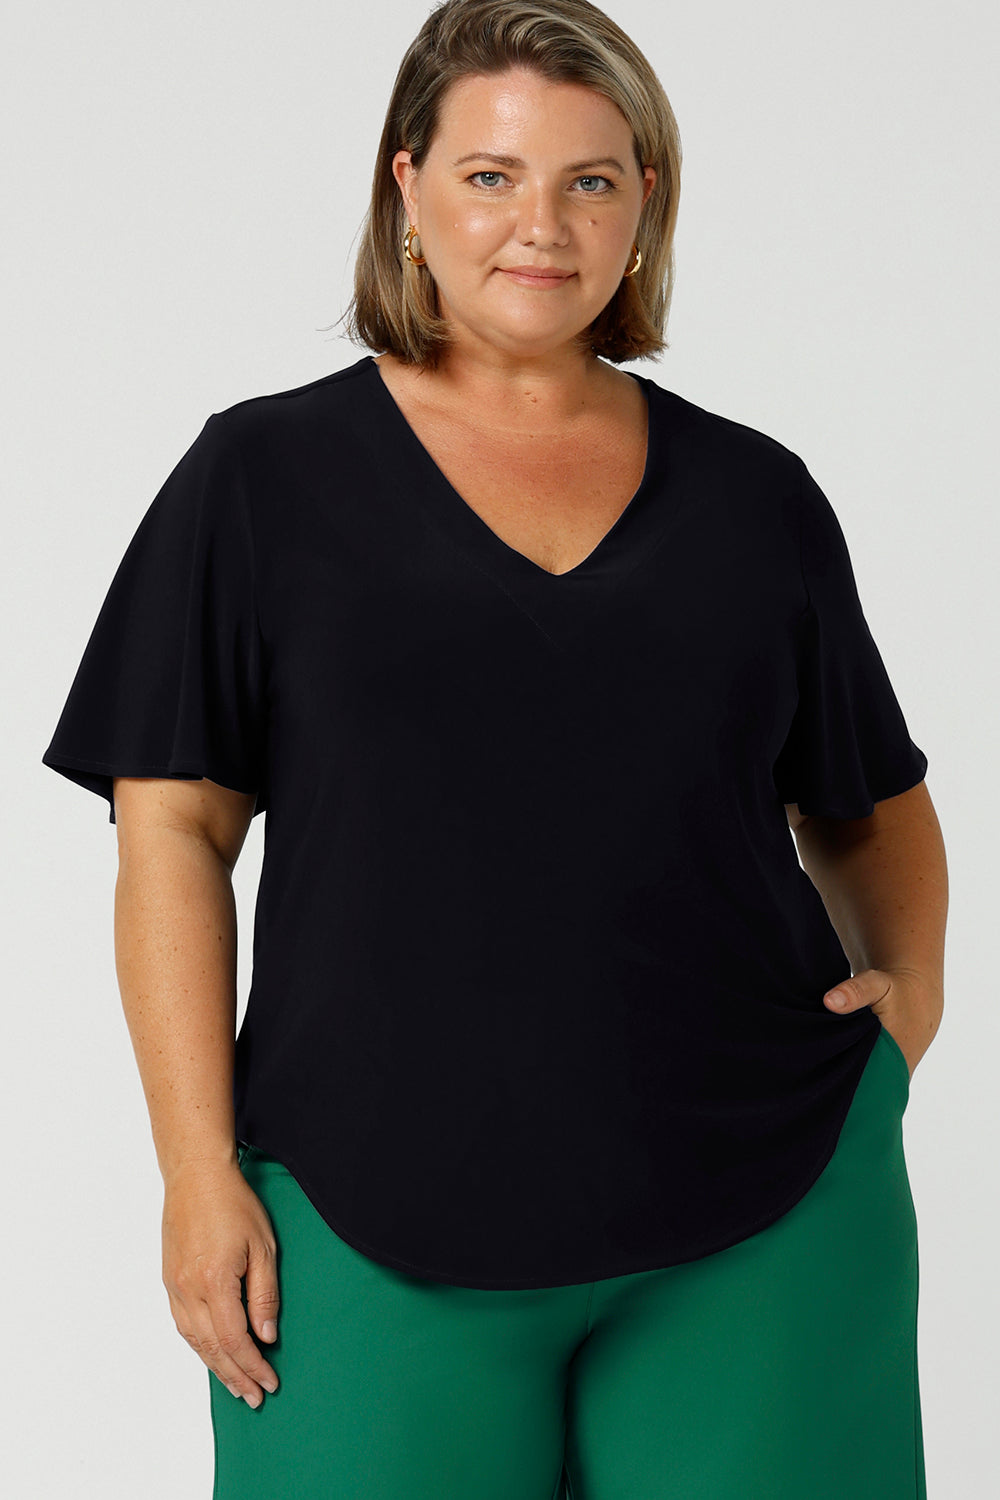 Worn by a size 18, plus size woman, this is a semi-fitted, V-neck top with flutter sleeves in navy blue jersey. Made in Australia by women's clothing brand, Leina & Fleur , this classic navy top is great for capsule wardrobes, smart casual wear and as a work blouse. Shop this top and other Australian-made women's clothing online in sizes 8 to 24 at Leina & Fleur's online fashion boutique!